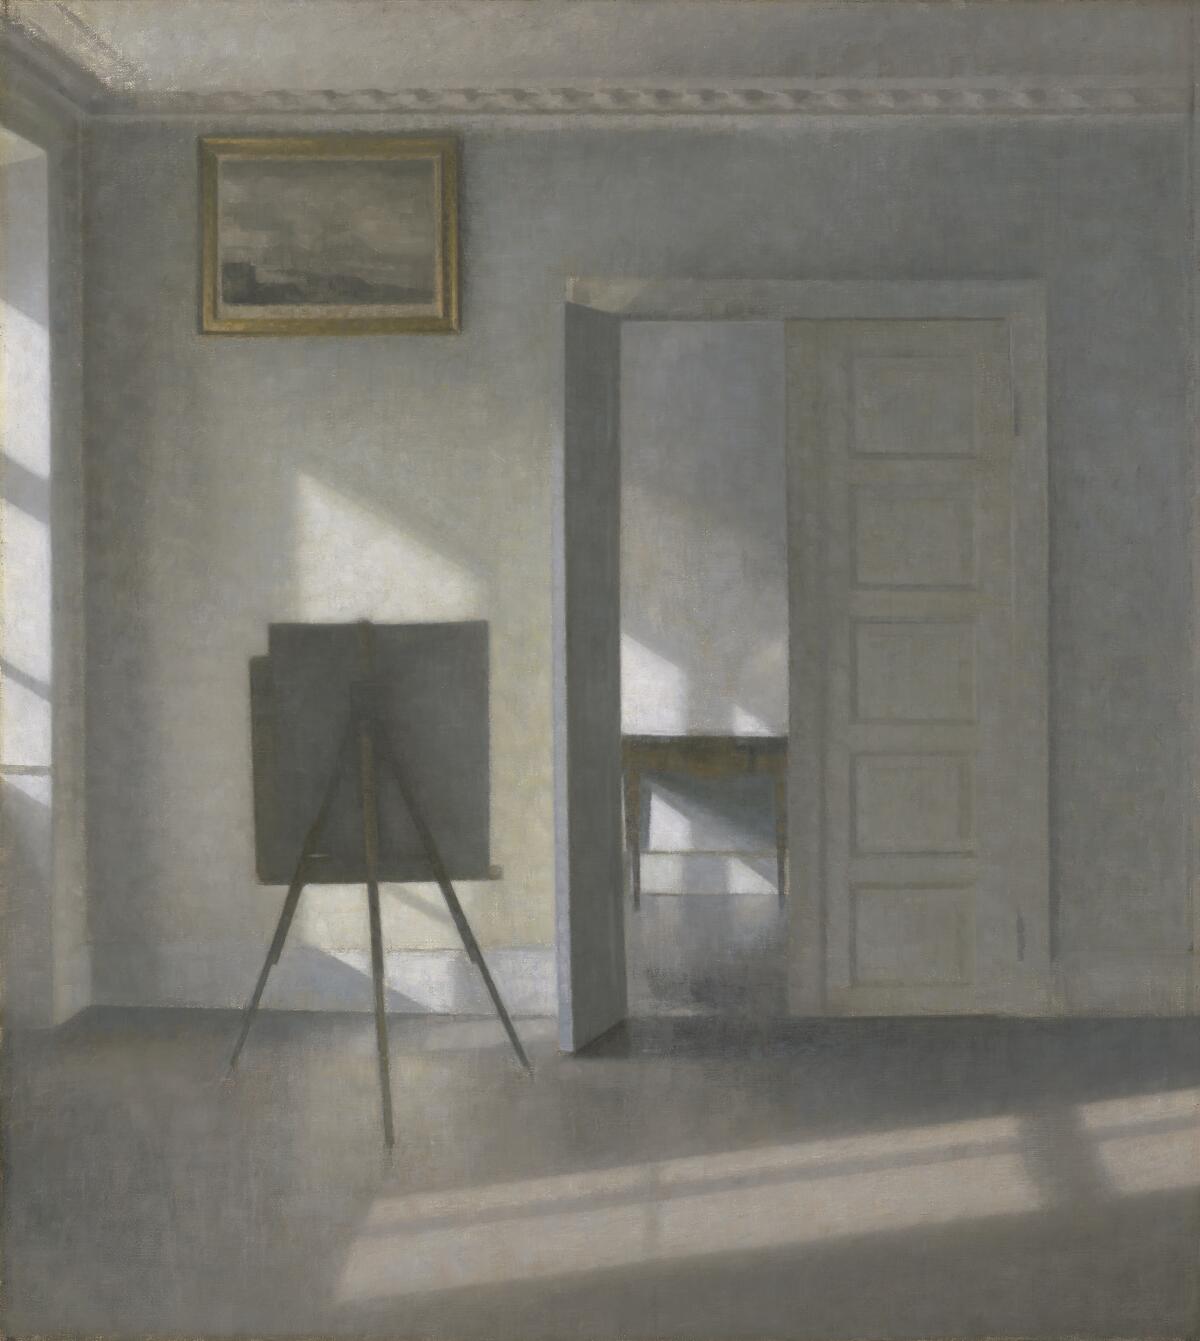 An oil painting of a room with an easel in the left corner below a painting on the wall.